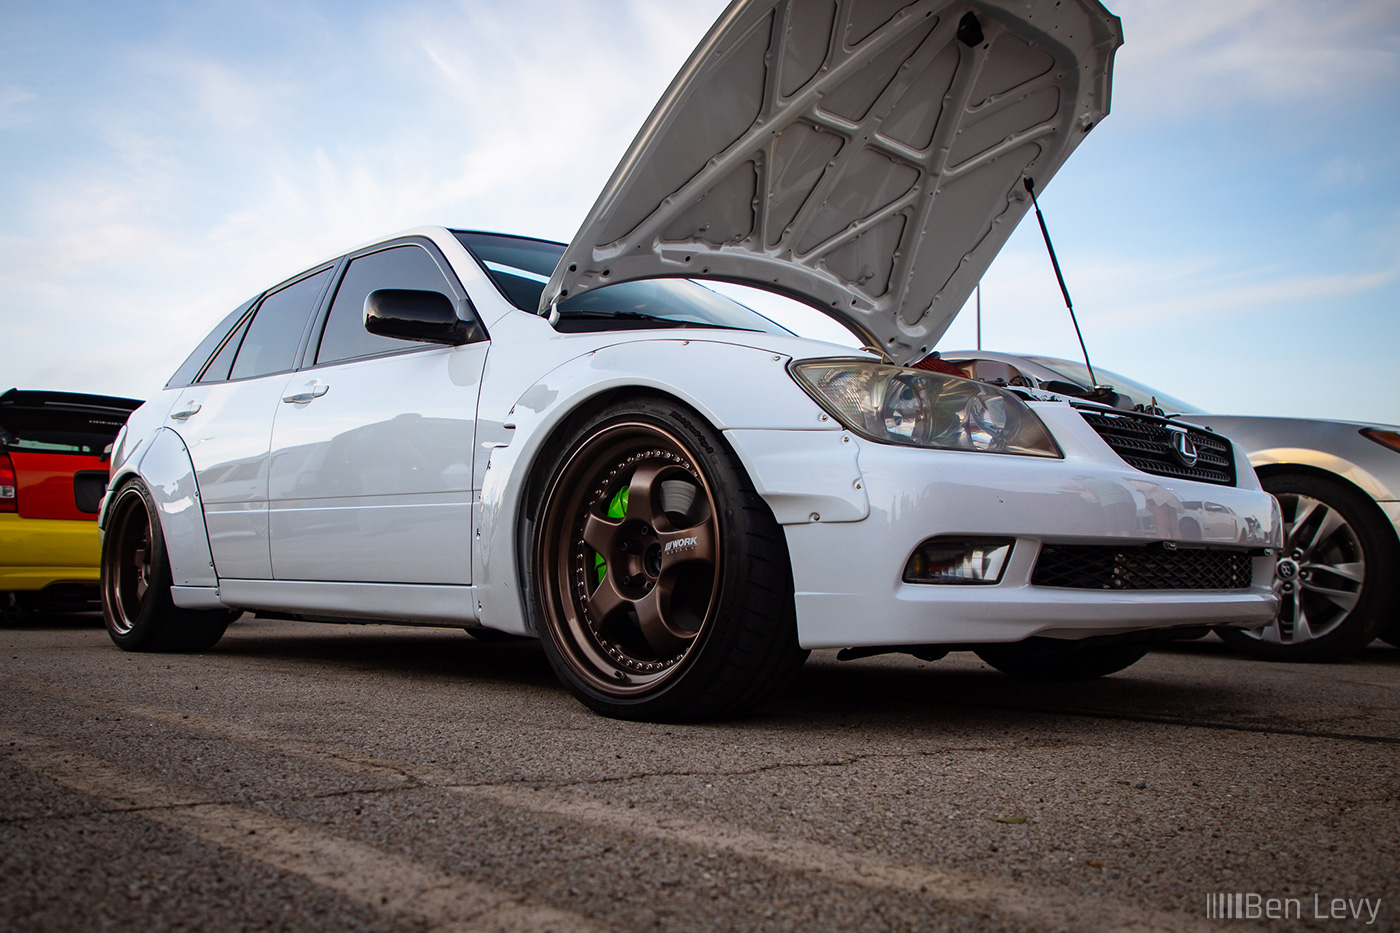 Widebody Lexus IS300 SportCross at car meet outside of Chicago